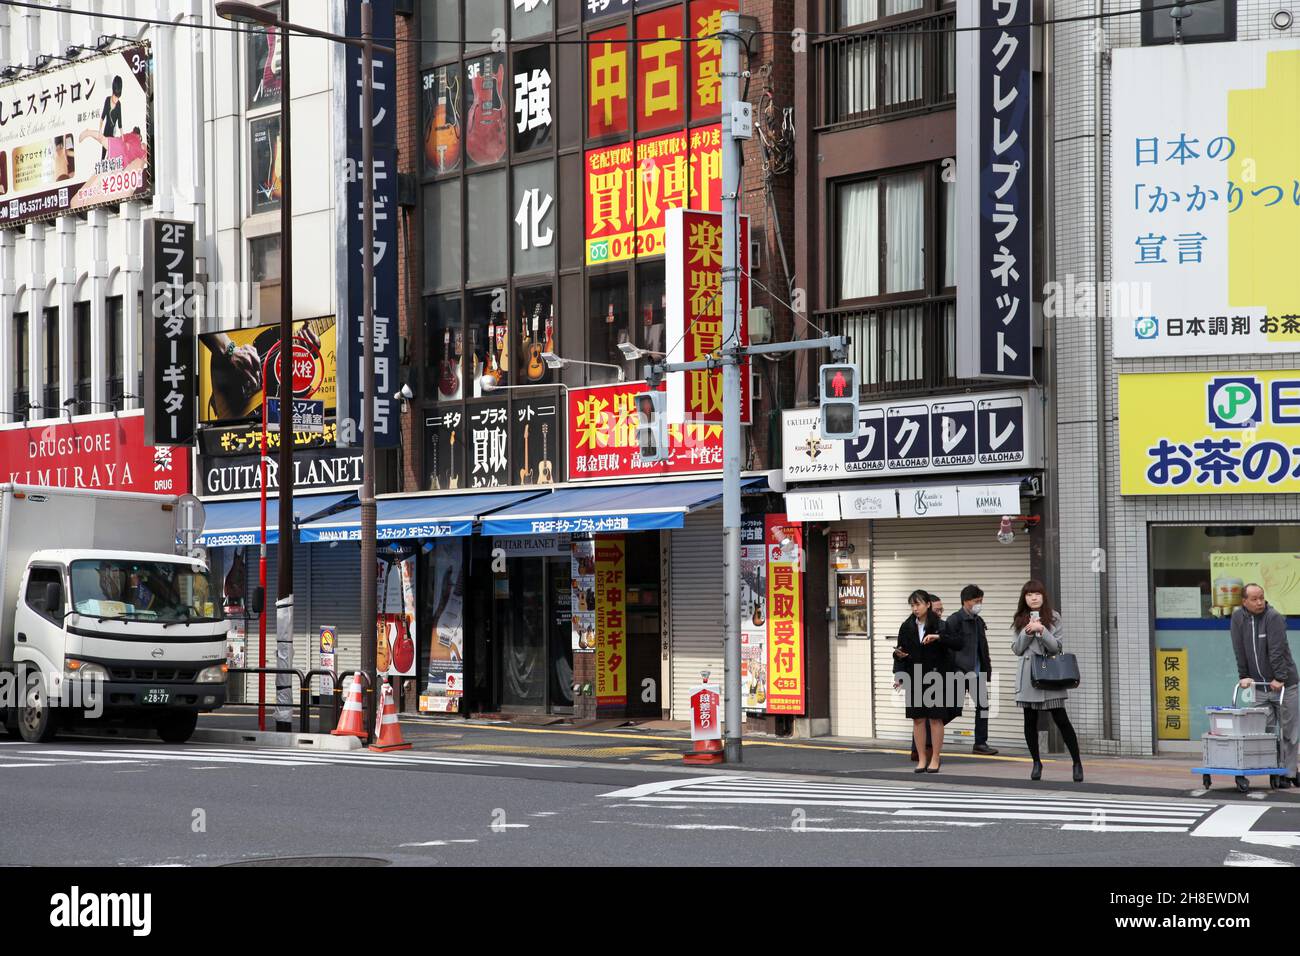 Guitar and other musical instrument shops and stores line both sides of Ochanomizu Street in Tokyo's Chiyoda Coty selling new and used instruments. Stock Photo